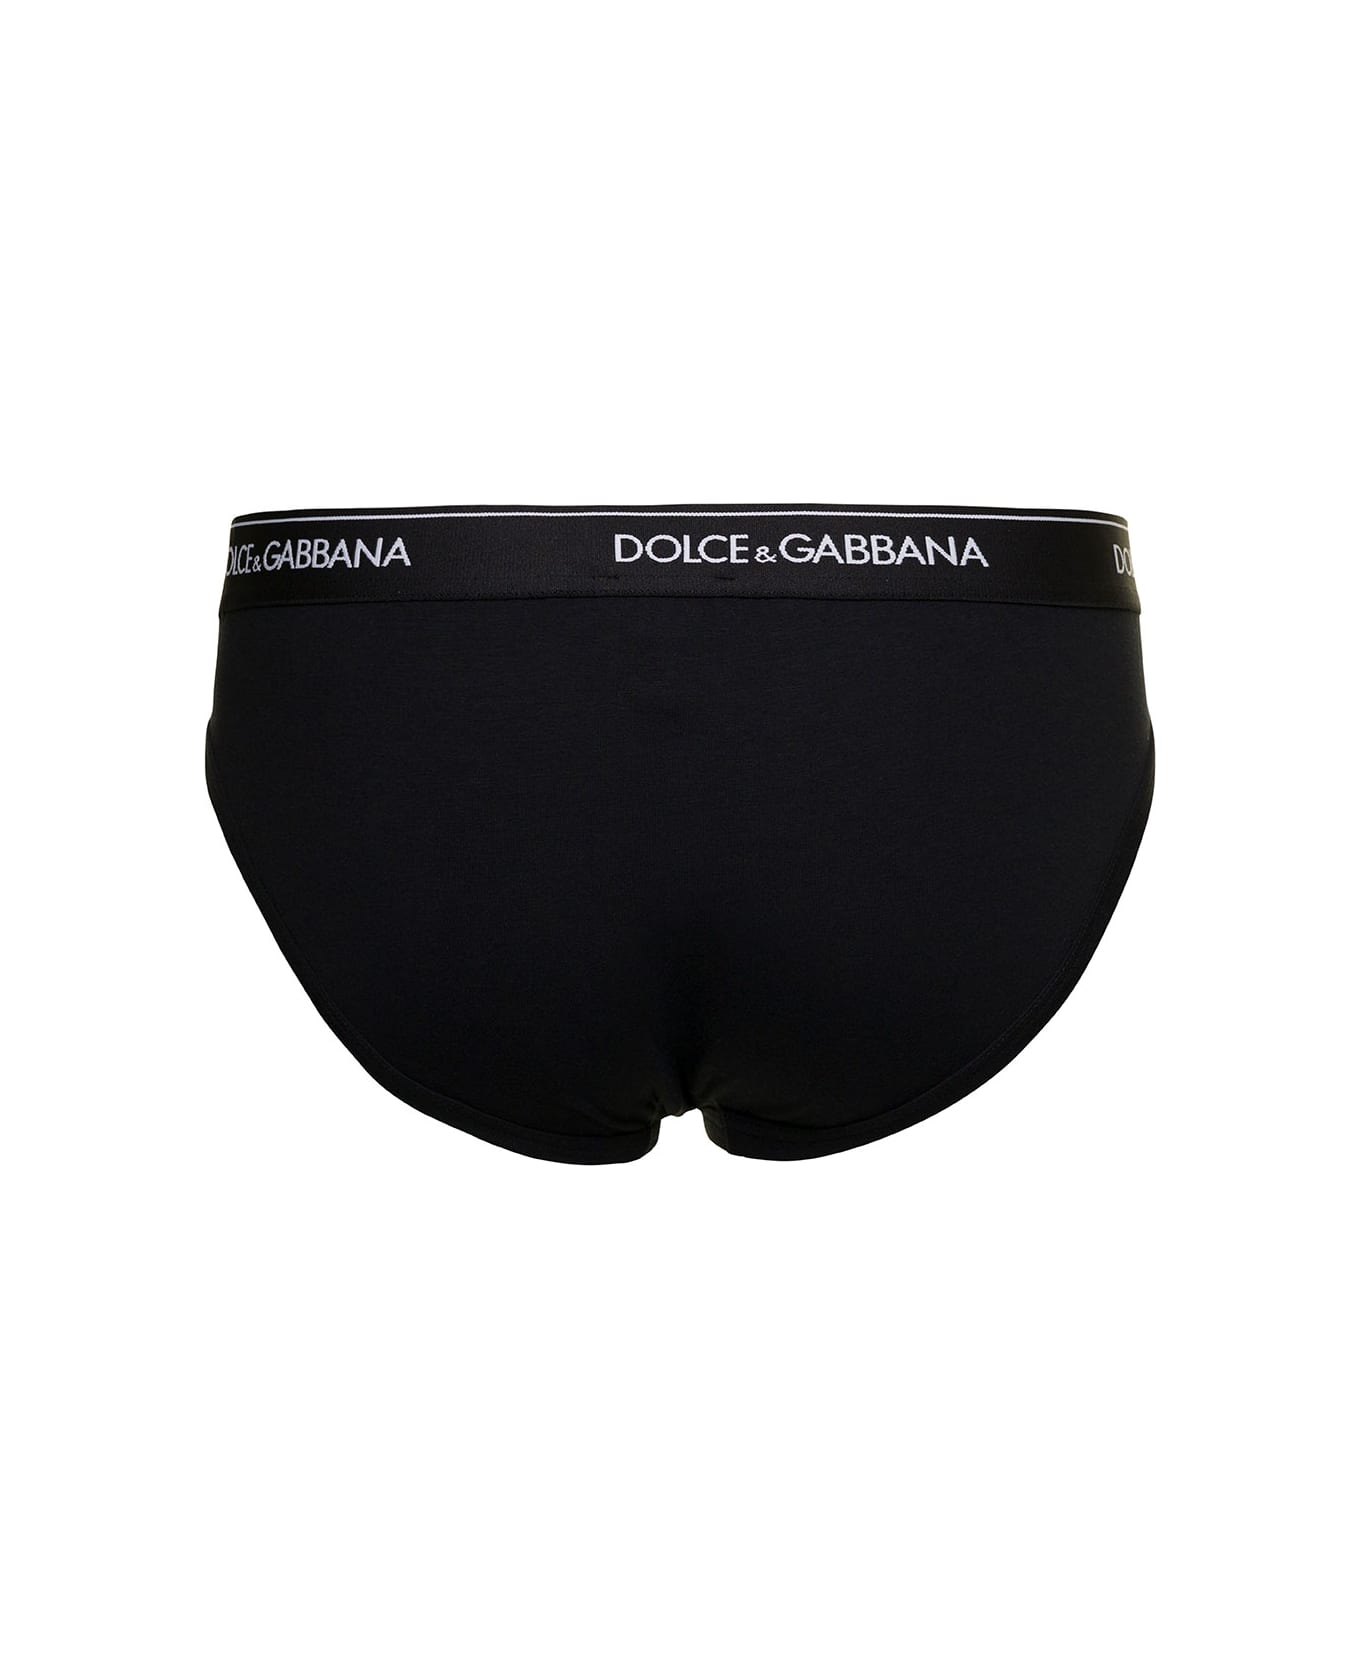 Dolce & Gabbana Cotton Briefs With Logoed Elastic Band - Black ショーツ